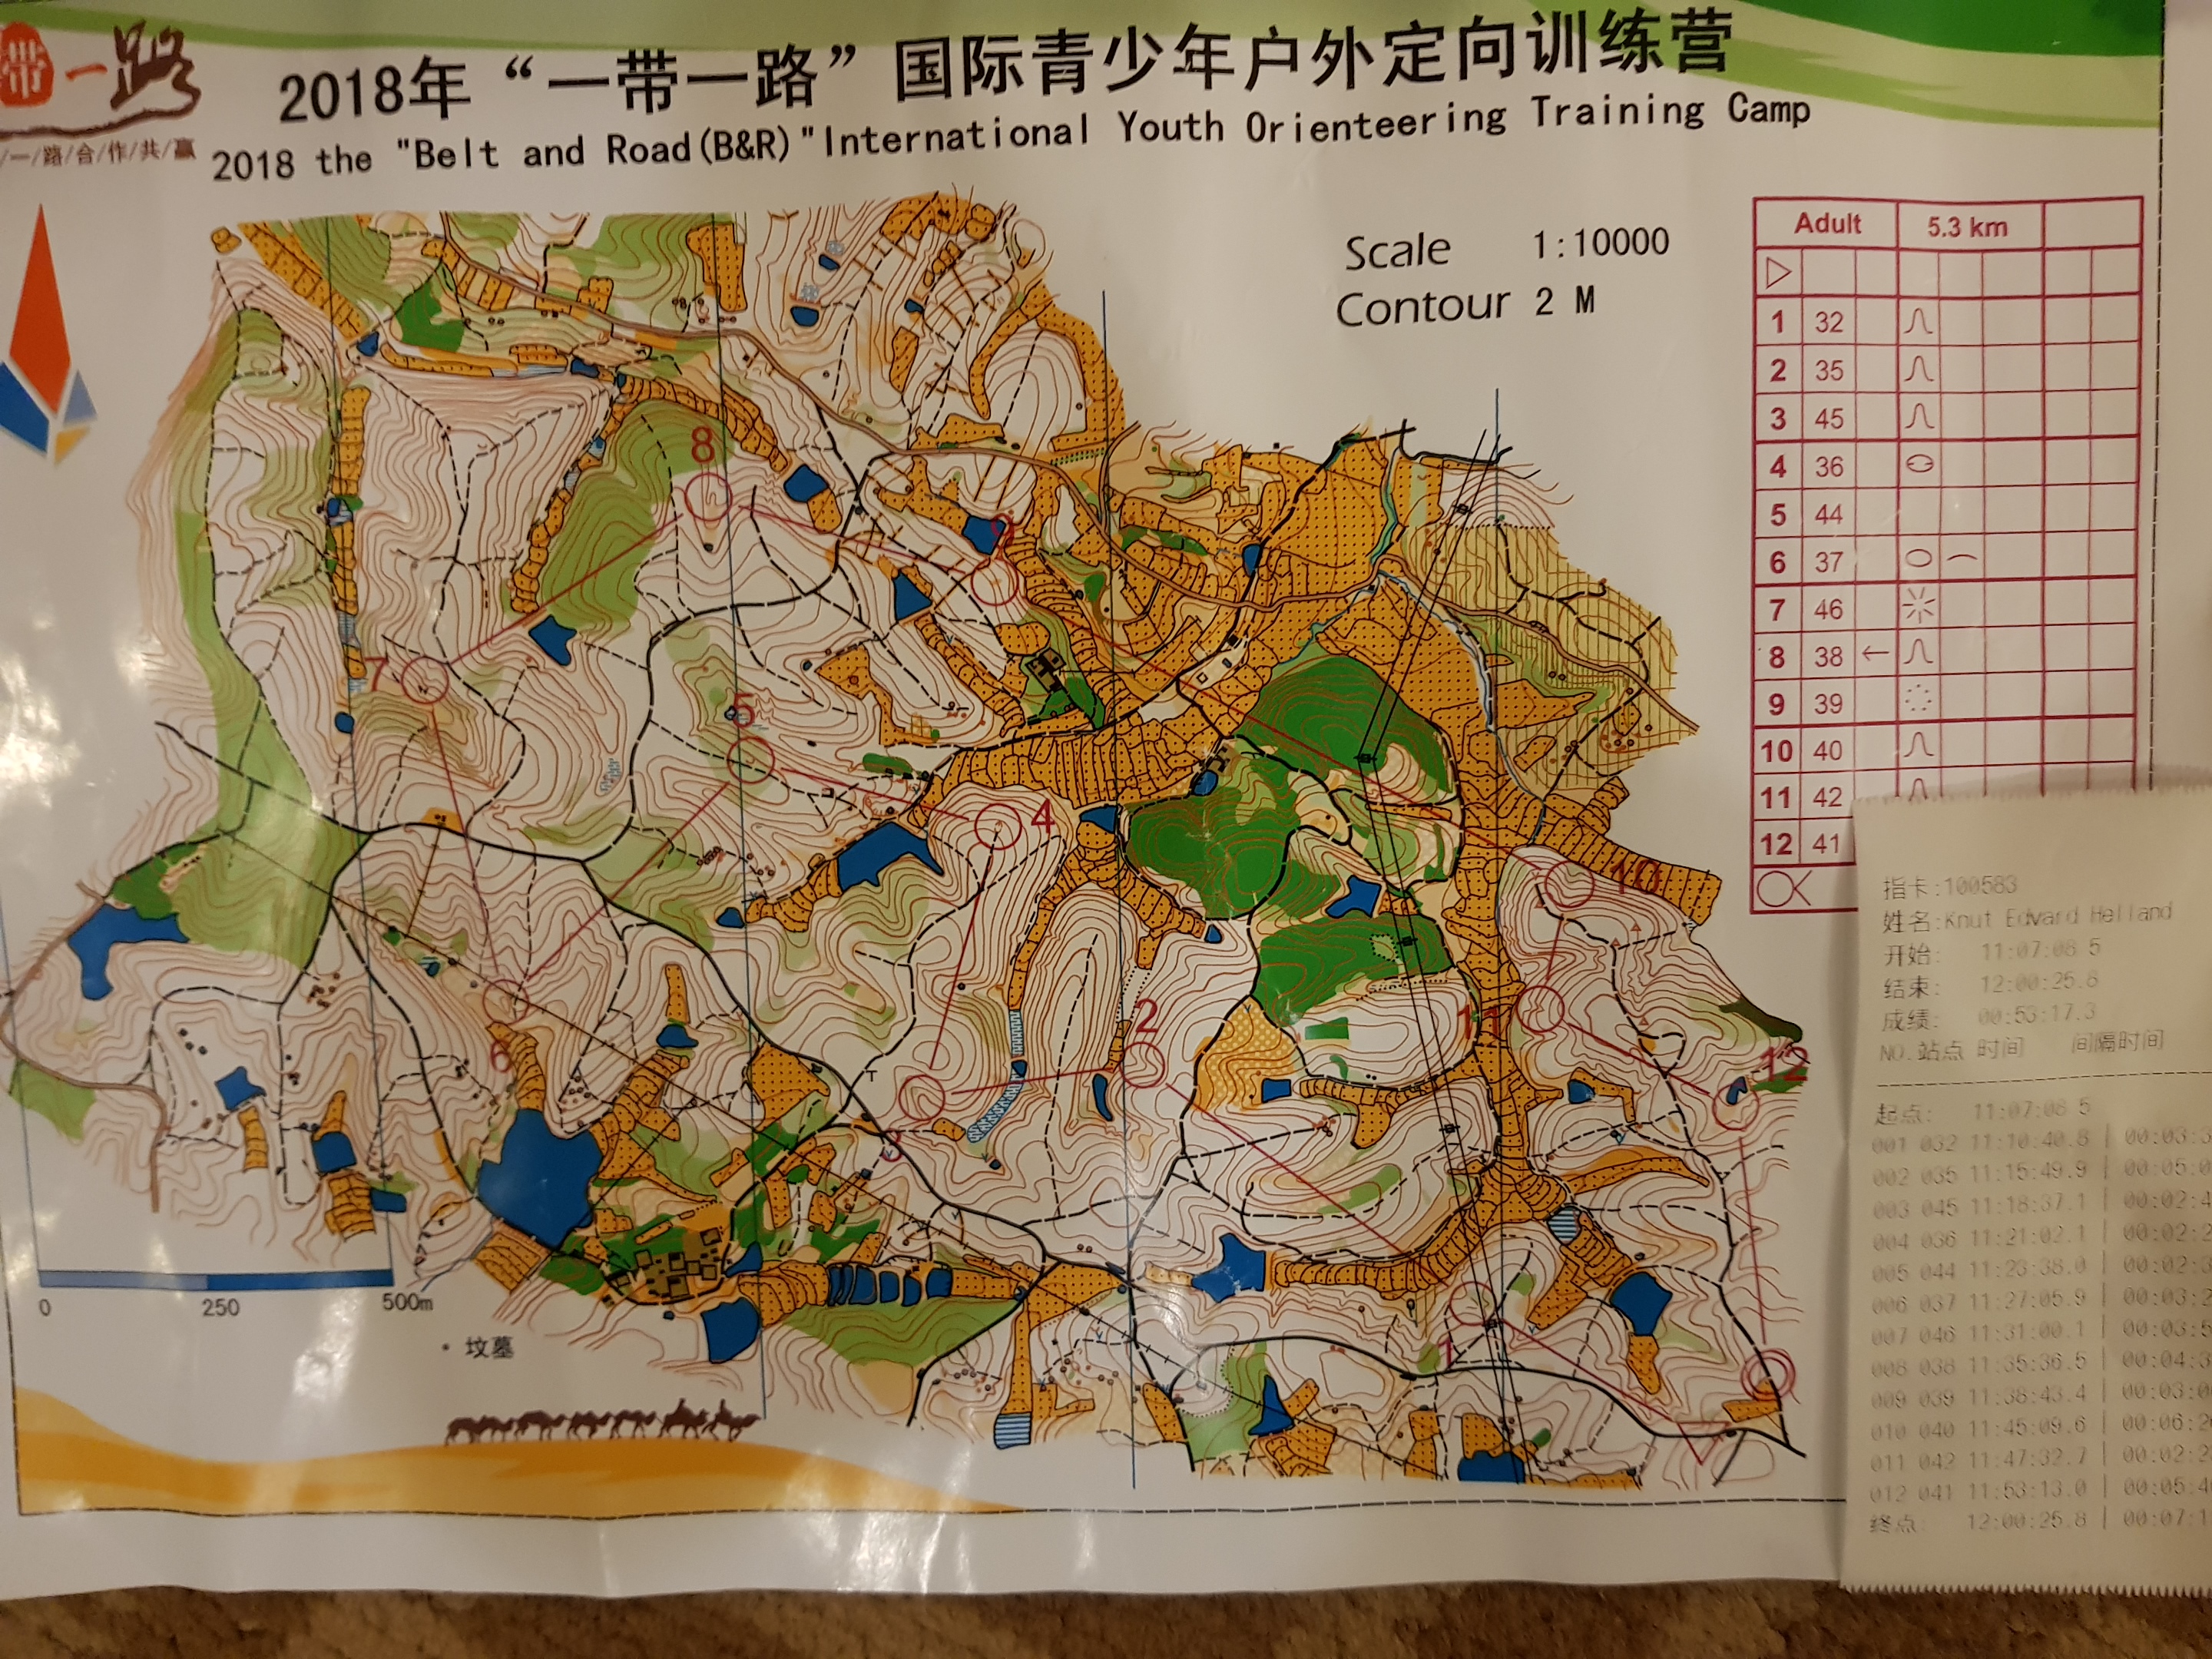 Belt and Road International Youth Orienteering Camp (25/10/2018)